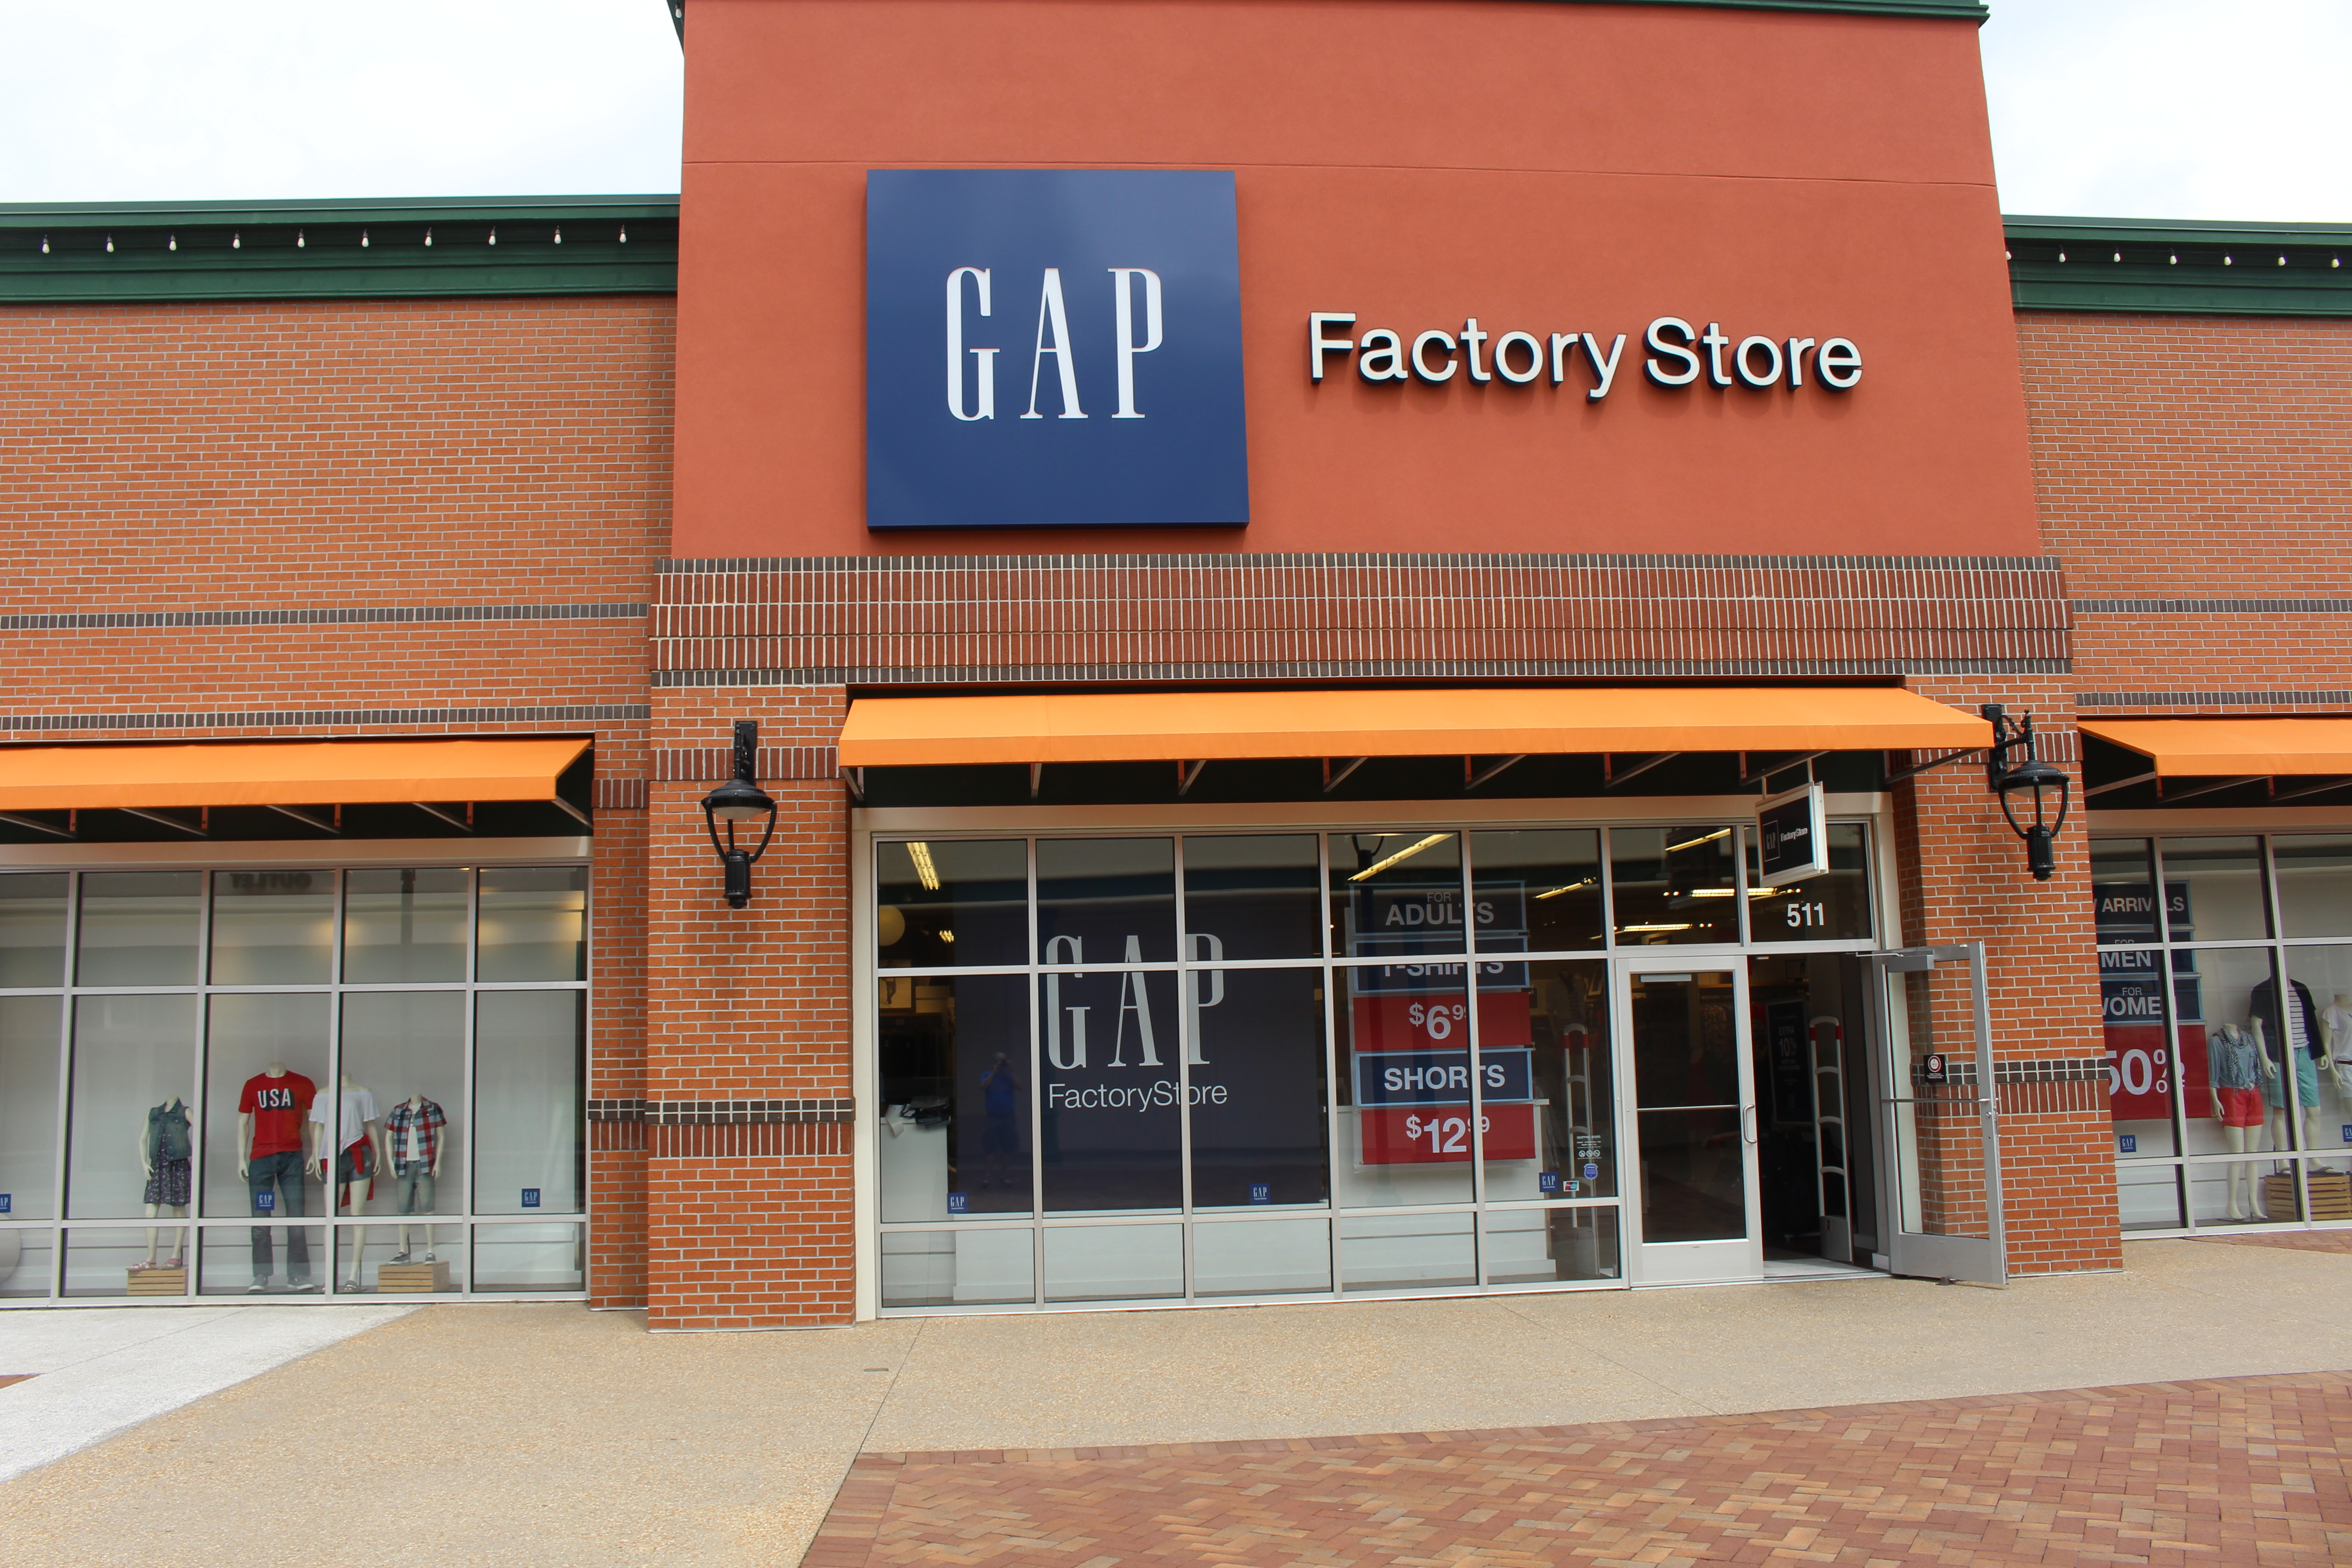 File:Gap Factory Store, Tanger Outlets Savannah.jpg - Wikimedia Commons